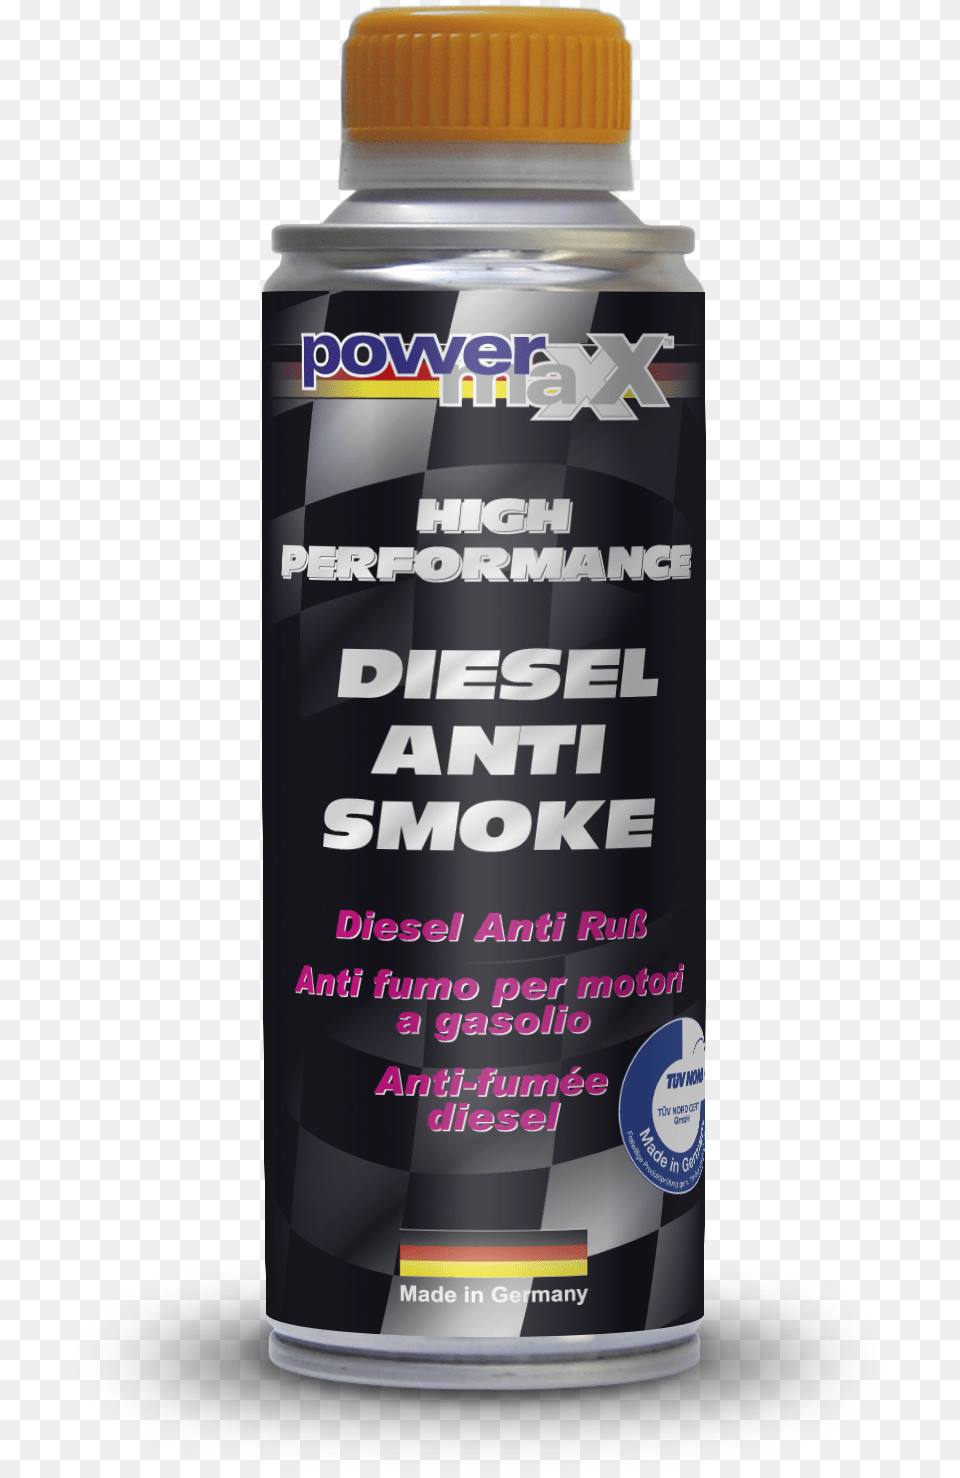 Diesel Anti Smoke Mosquito, Can, Spray Can, Tin, Bottle Png